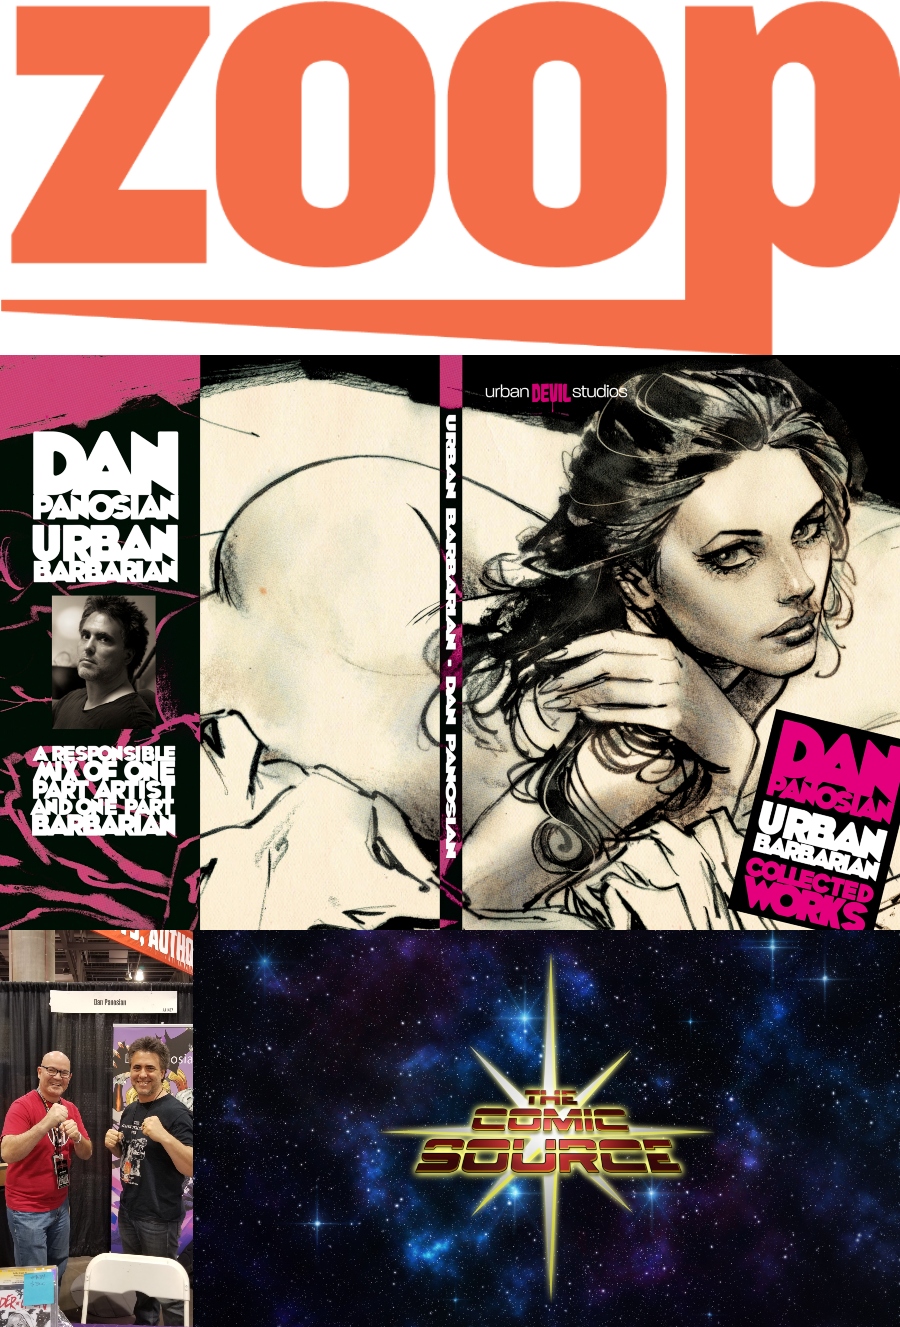 Urban Barbarian Collected Works with Dan Panosian: The Comic Source Podcast